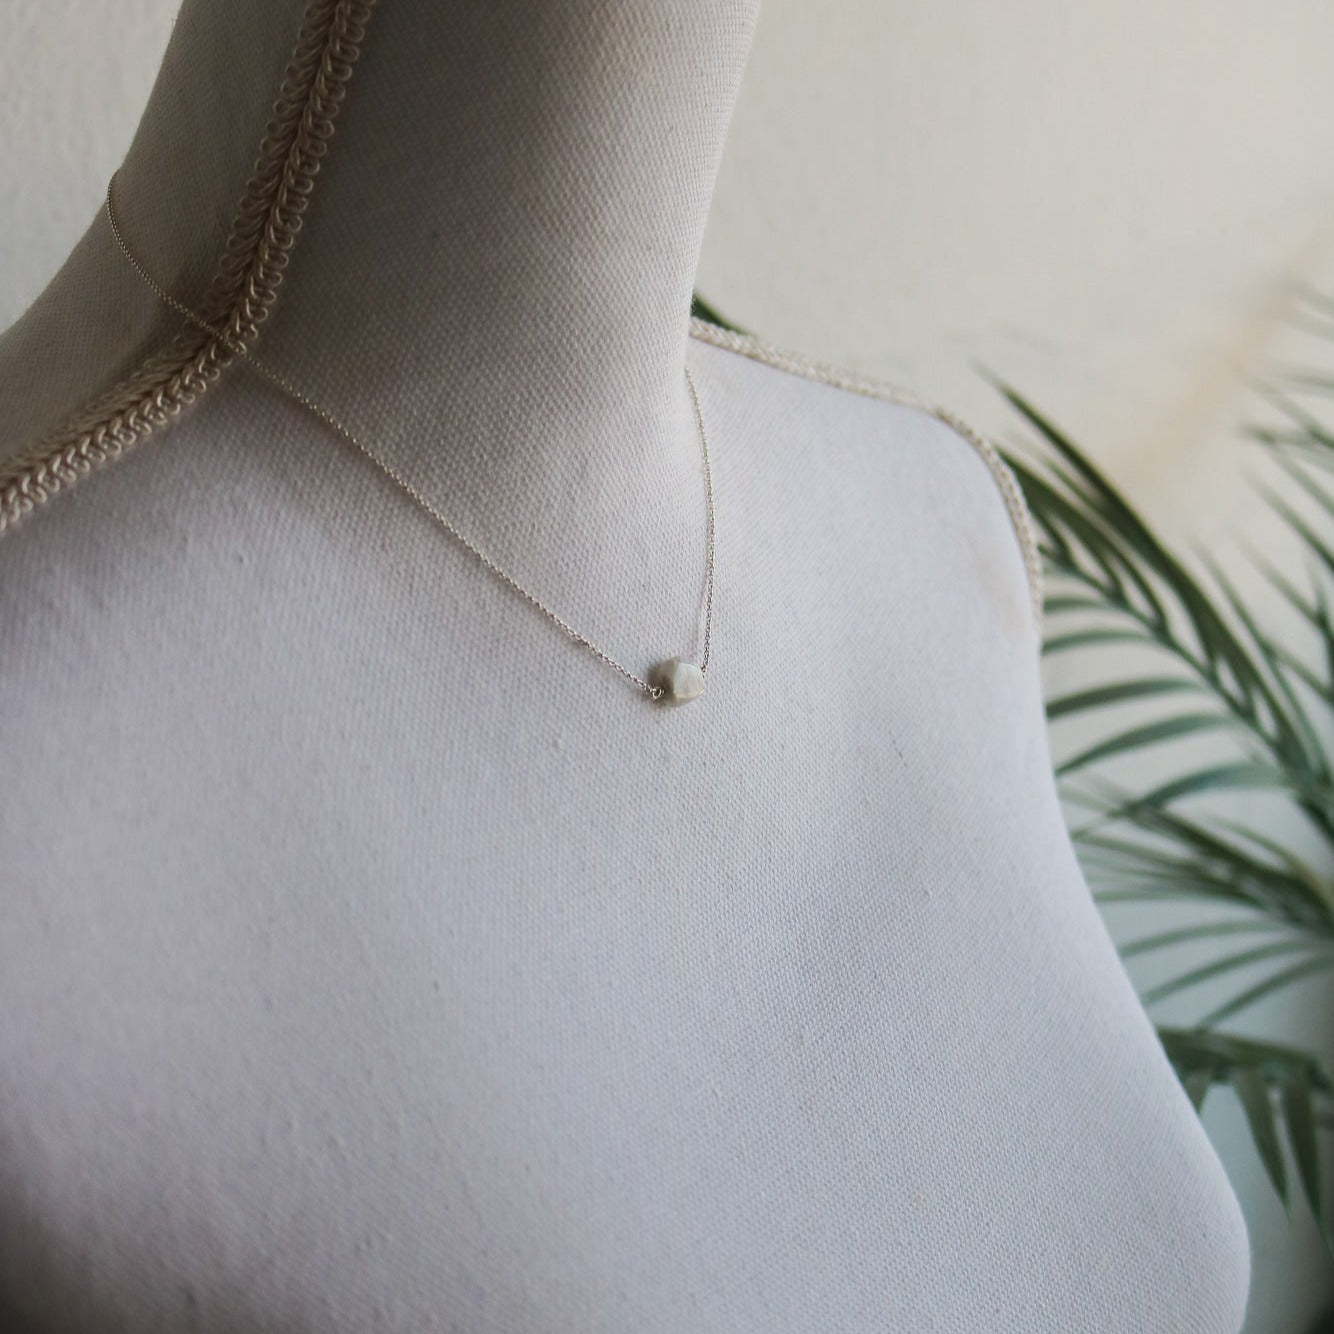 Vail // 'White Buffalo' Nugget Necklace